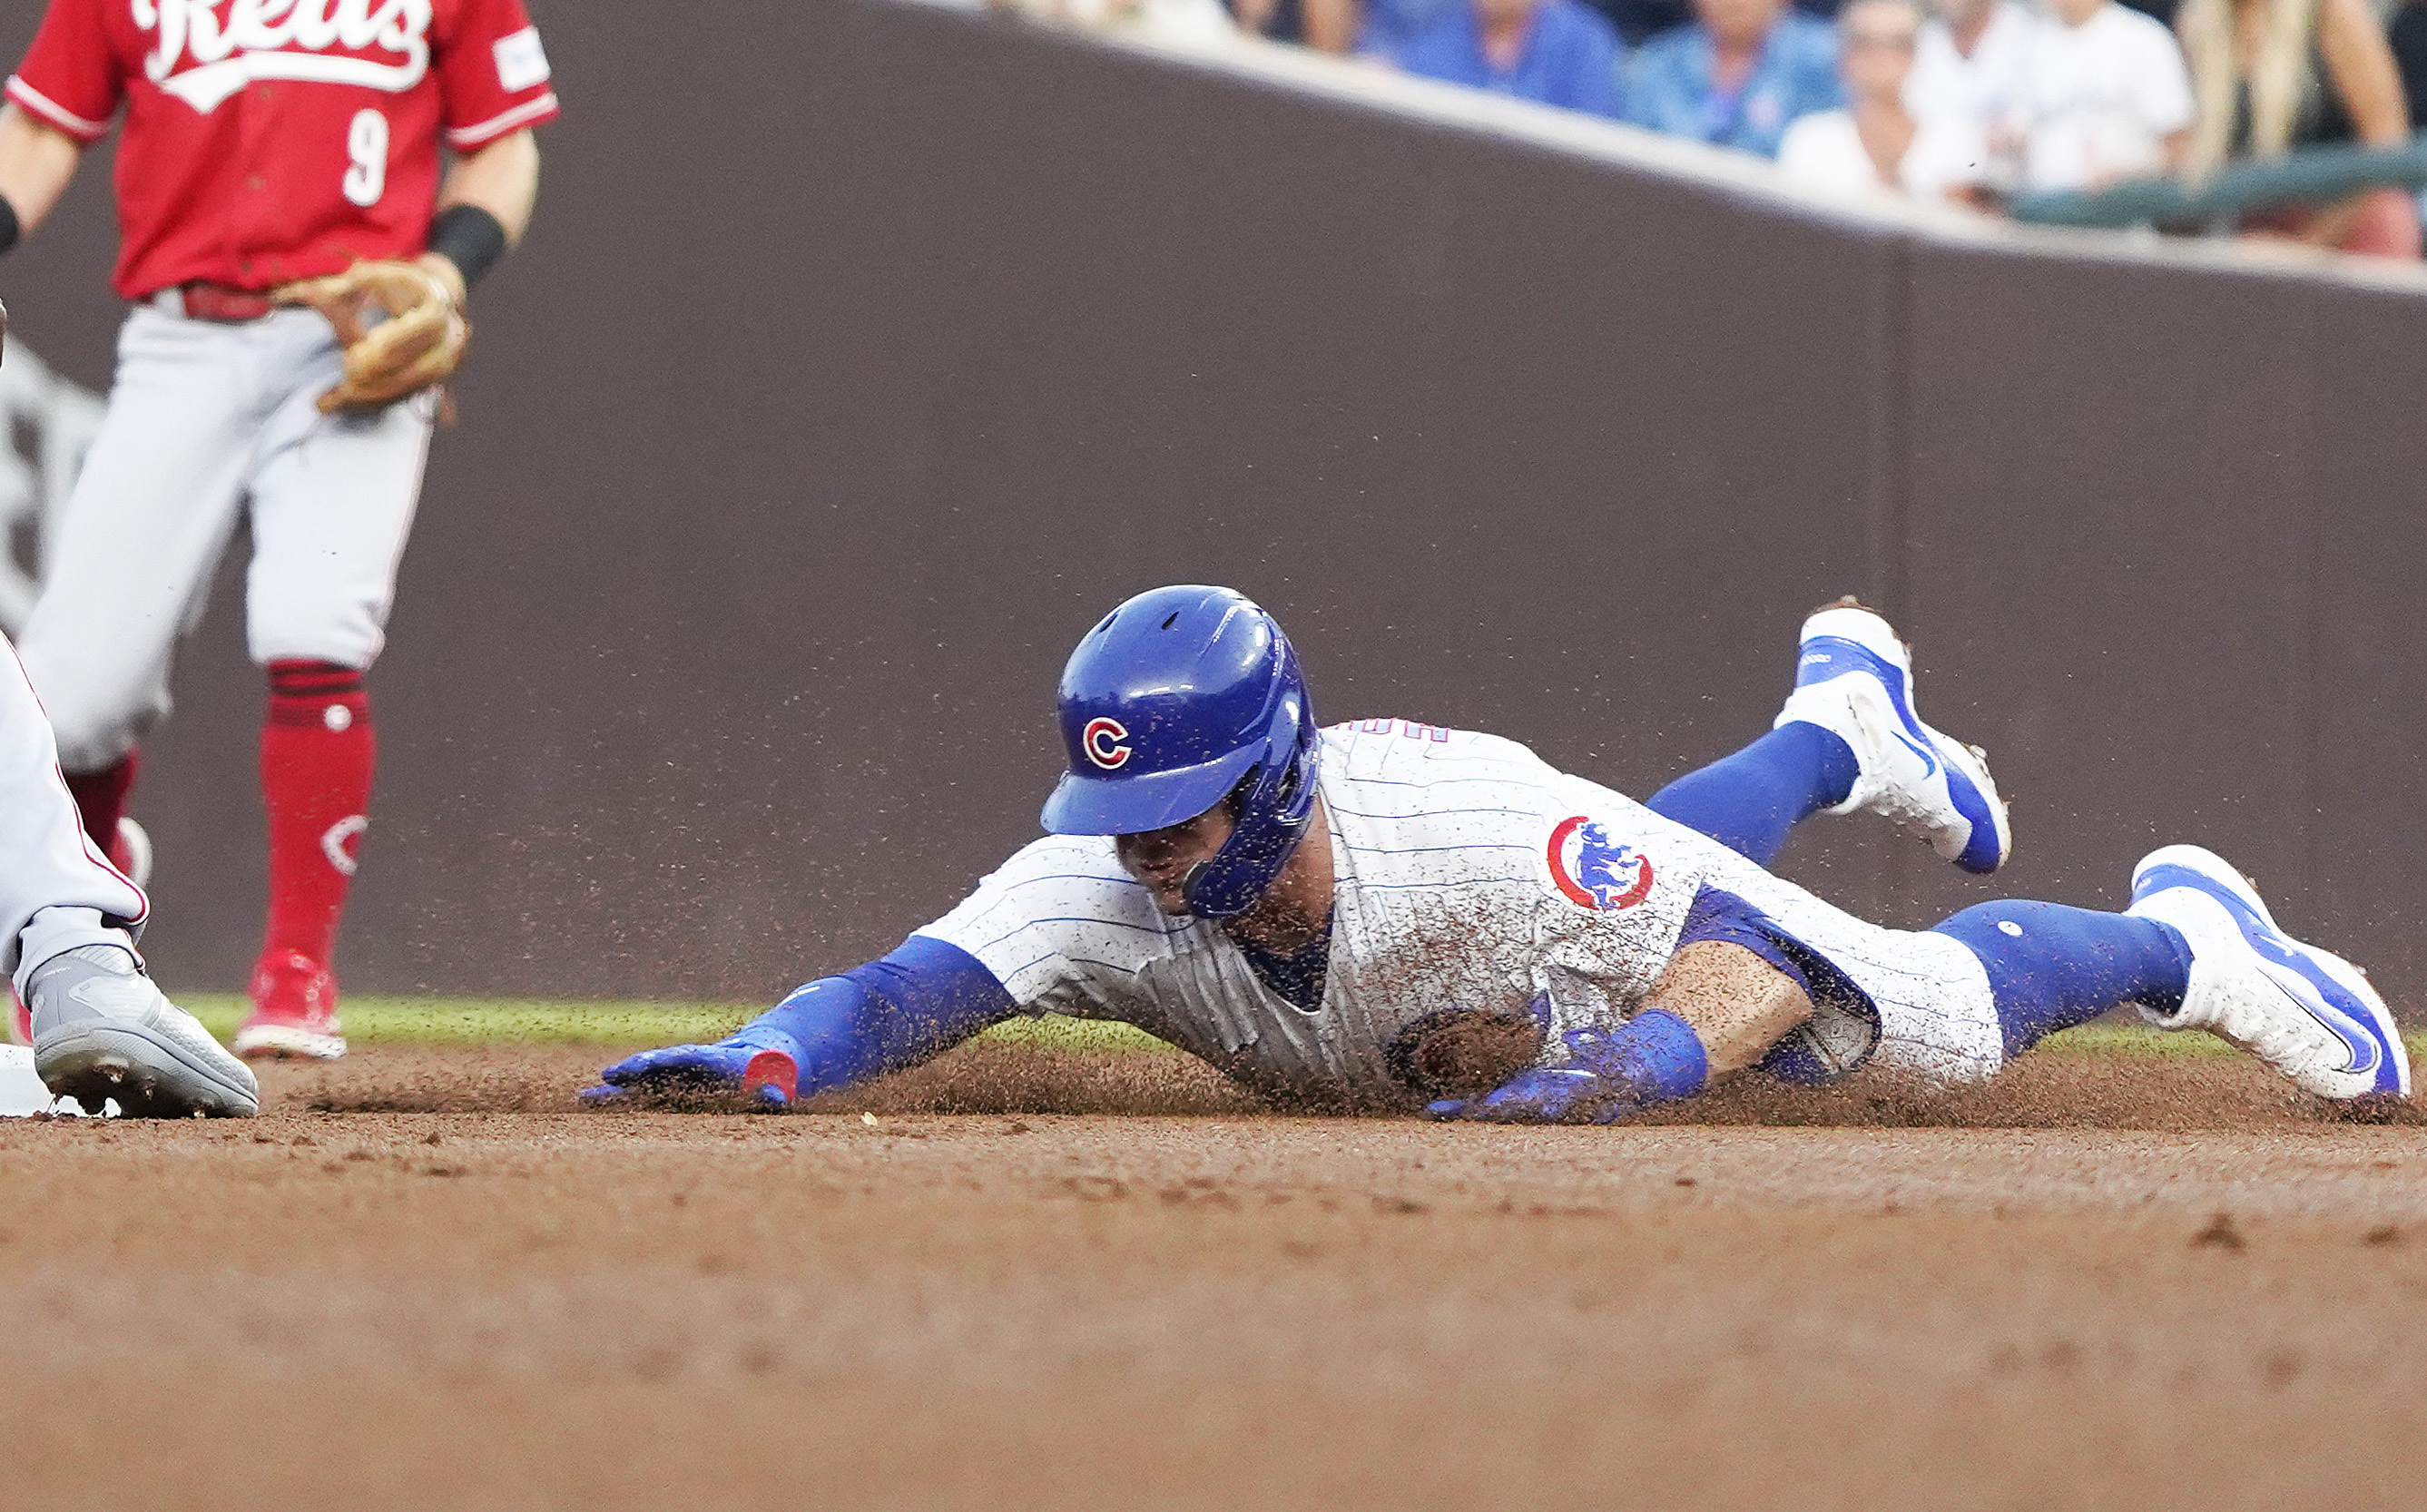 Cubs beat Reds for third straight win